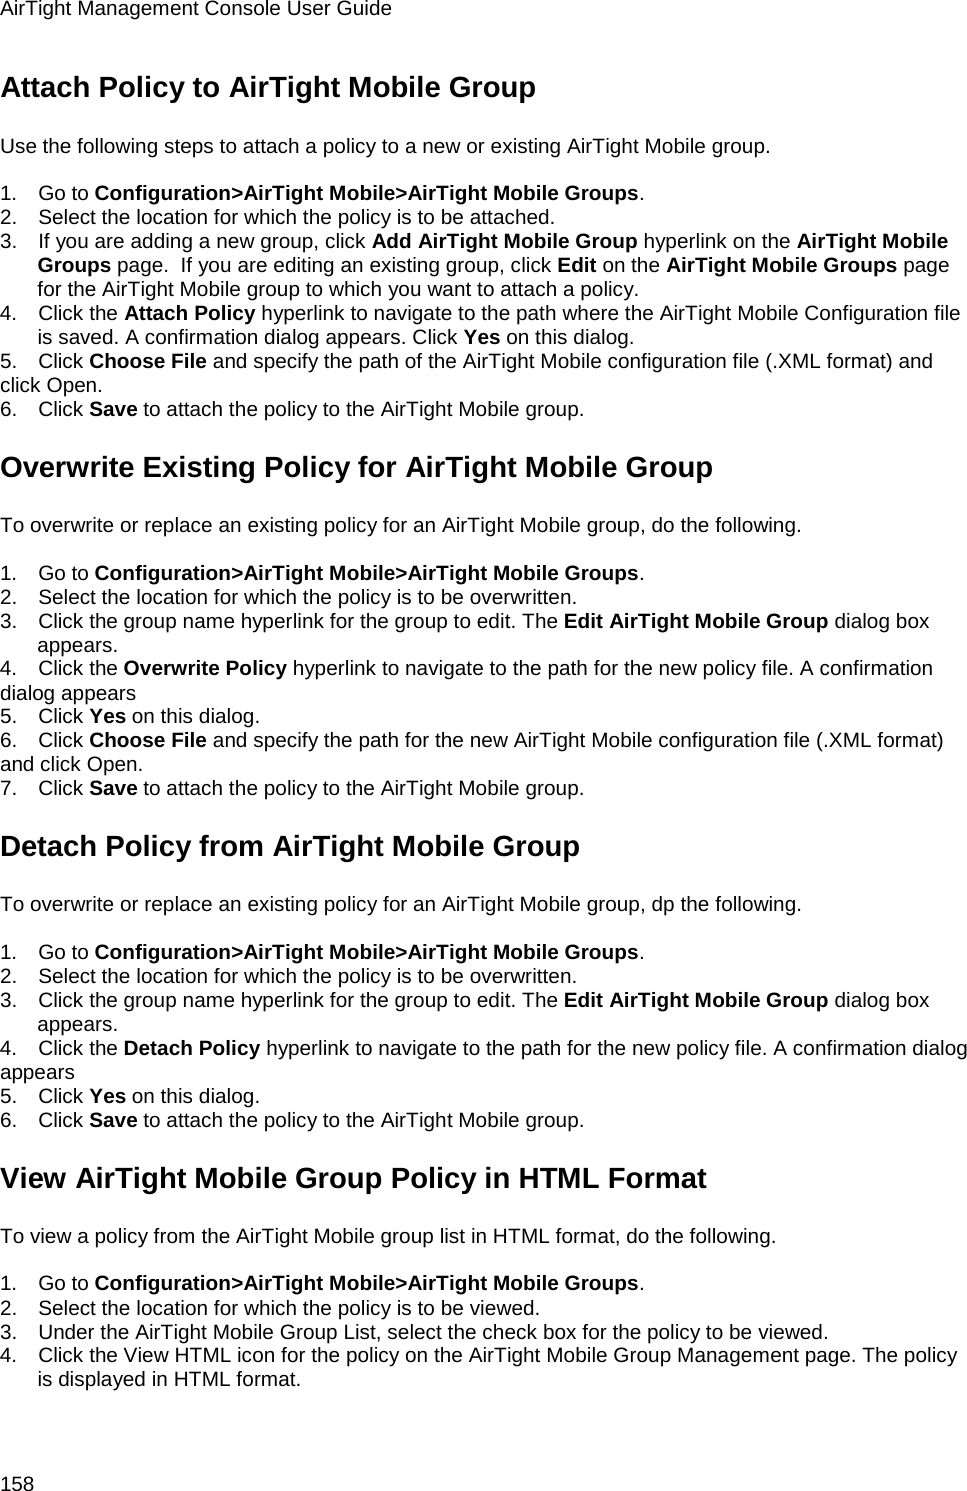 AirTight Management Console User Guide 158 Attach Policy to AirTight Mobile Group Use the following steps to attach a policy to a new or existing AirTight Mobile group.   1.      Go to Configuration&gt;AirTight Mobile&gt;AirTight Mobile Groups. 2.      Select the location for which the policy is to be attached. 3.      If you are adding a new group, click Add AirTight Mobile Group hyperlink on the AirTight Mobile Groups page.  If you are editing an existing group, click Edit on the AirTight Mobile Groups page for the AirTight Mobile group to which you want to attach a policy. 4.      Click the Attach Policy hyperlink to navigate to the path where the AirTight Mobile Configuration file is saved. A confirmation dialog appears. Click Yes on this dialog. 5.      Click Choose File and specify the path of the AirTight Mobile configuration file (.XML format) and click Open. 6.      Click Save to attach the policy to the AirTight Mobile group. Overwrite Existing Policy for AirTight Mobile Group To overwrite or replace an existing policy for an AirTight Mobile group, do the following.   1.      Go to Configuration&gt;AirTight Mobile&gt;AirTight Mobile Groups. 2.      Select the location for which the policy is to be overwritten. 3.      Click the group name hyperlink for the group to edit. The Edit AirTight Mobile Group dialog box appears. 4.      Click the Overwrite Policy hyperlink to navigate to the path for the new policy file. A confirmation dialog appears 5.      Click Yes on this dialog. 6.      Click Choose File and specify the path for the new AirTight Mobile configuration file (.XML format) and click Open. 7.      Click Save to attach the policy to the AirTight Mobile group. Detach Policy from AirTight Mobile Group To overwrite or replace an existing policy for an AirTight Mobile group, dp the following.   1.      Go to Configuration&gt;AirTight Mobile&gt;AirTight Mobile Groups. 2.      Select the location for which the policy is to be overwritten. 3.      Click the group name hyperlink for the group to edit. The Edit AirTight Mobile Group dialog box appears. 4.      Click the Detach Policy hyperlink to navigate to the path for the new policy file. A confirmation dialog appears 5.      Click Yes on this dialog. 6.      Click Save to attach the policy to the AirTight Mobile group. View AirTight Mobile Group Policy in HTML Format To view a policy from the AirTight Mobile group list in HTML format, do the following.   1.      Go to Configuration&gt;AirTight Mobile&gt;AirTight Mobile Groups. 2.      Select the location for which the policy is to be viewed. 3.      Under the AirTight Mobile Group List, select the check box for the policy to be viewed. 4.      Click the View HTML icon for the policy on the AirTight Mobile Group Management page. The policy is displayed in HTML format.   